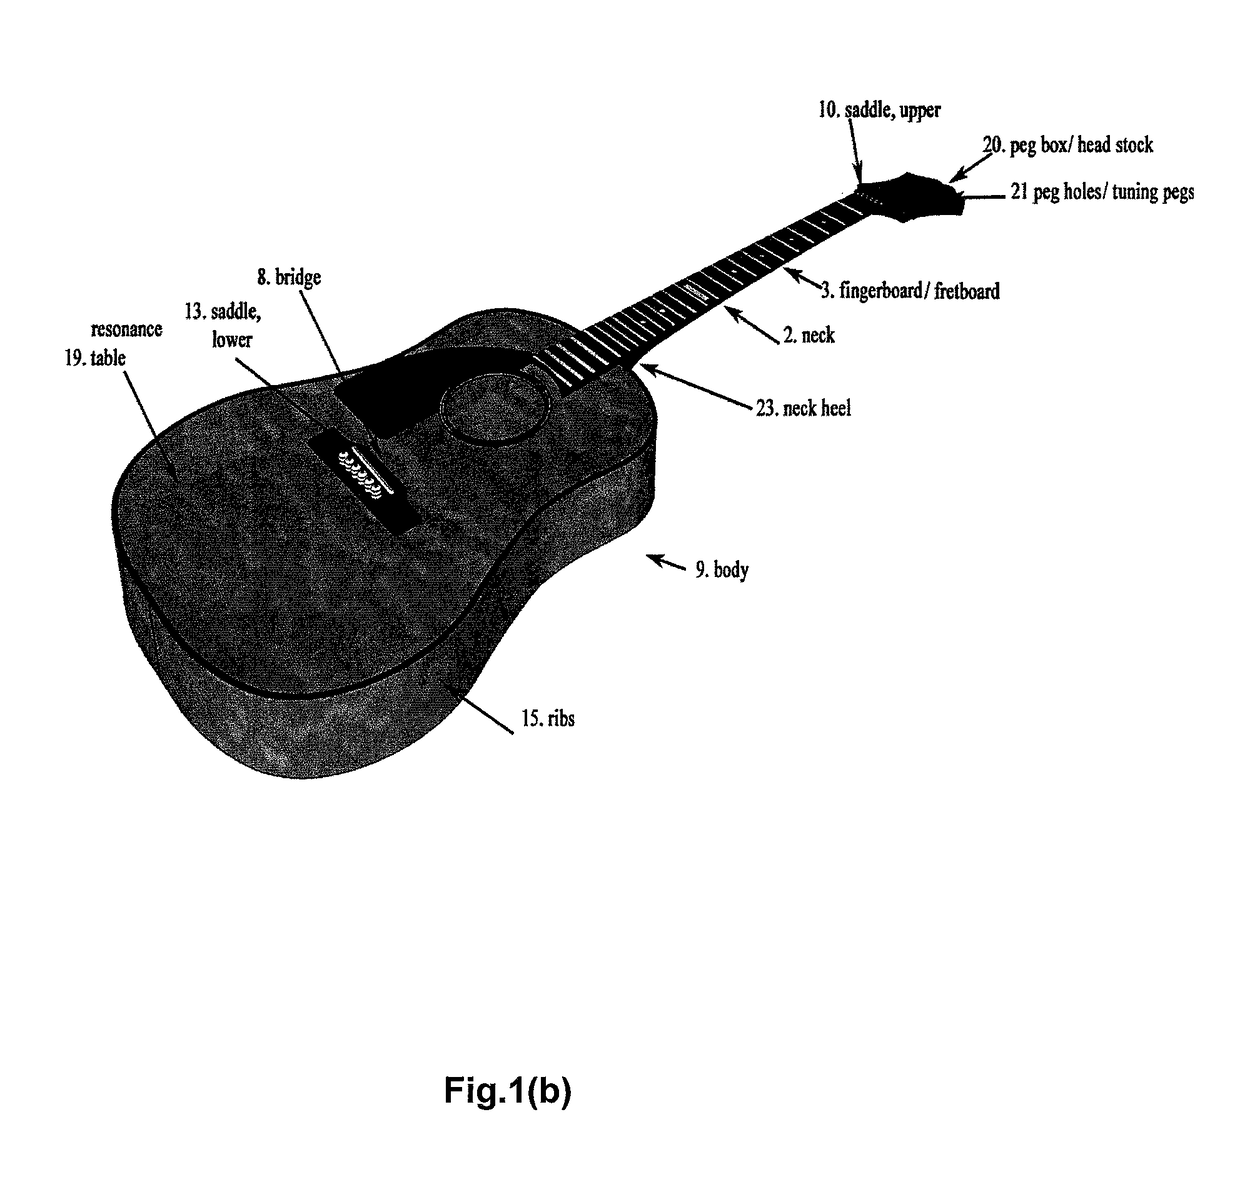 Elements to improve the sound quality of stringed musical instruments